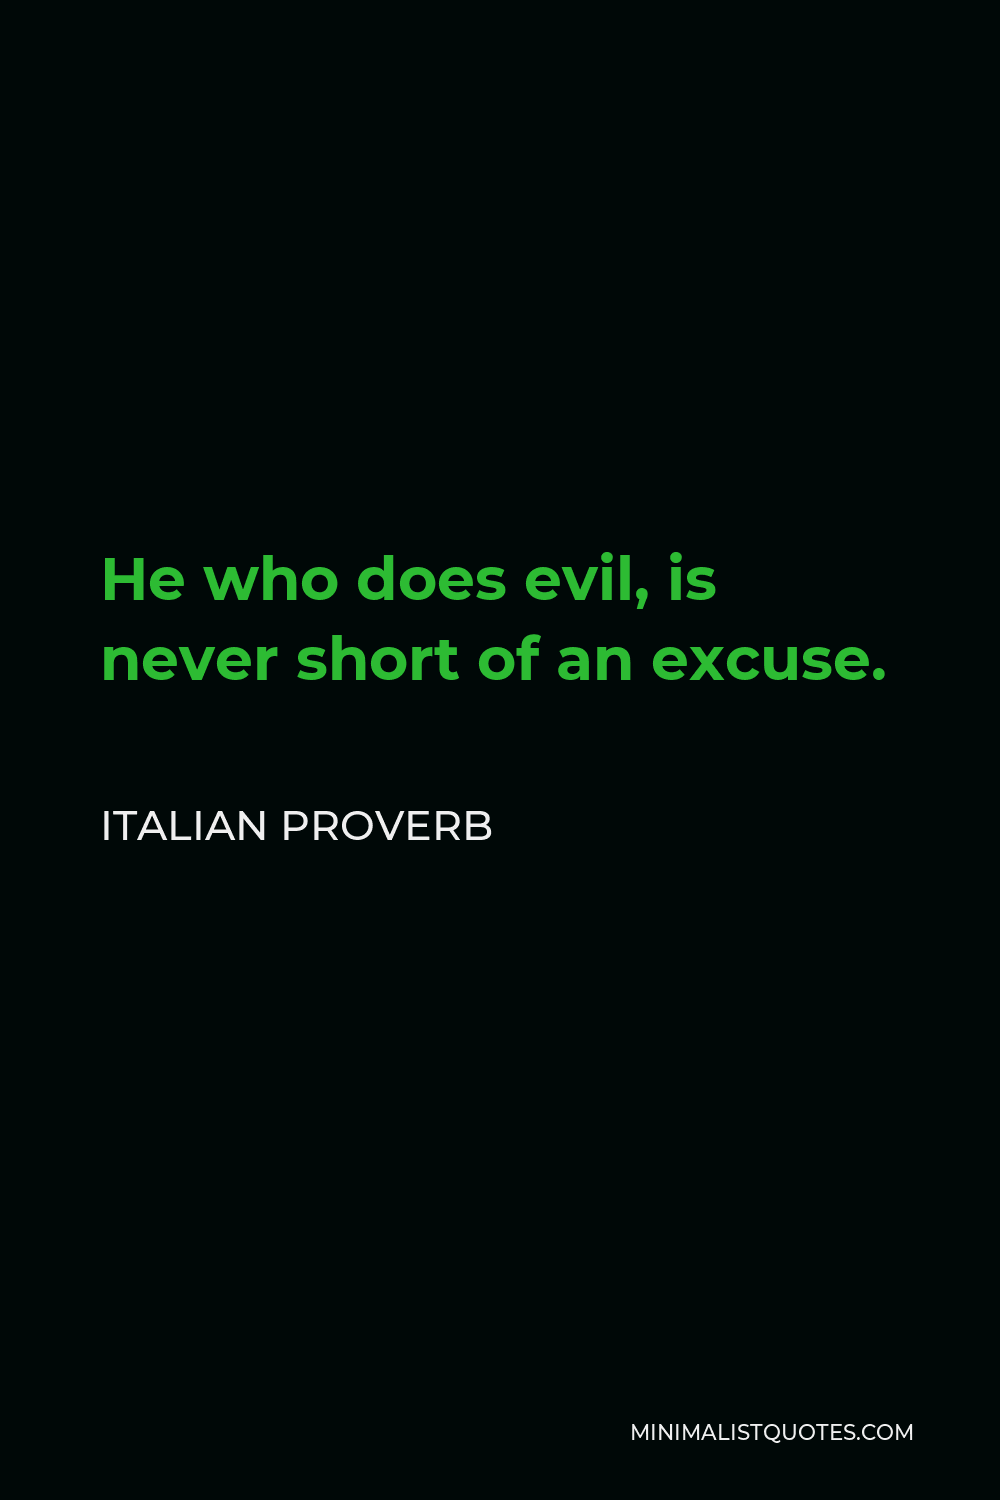 Italian Proverb Quote - He who does evil, is never short of an excuse.